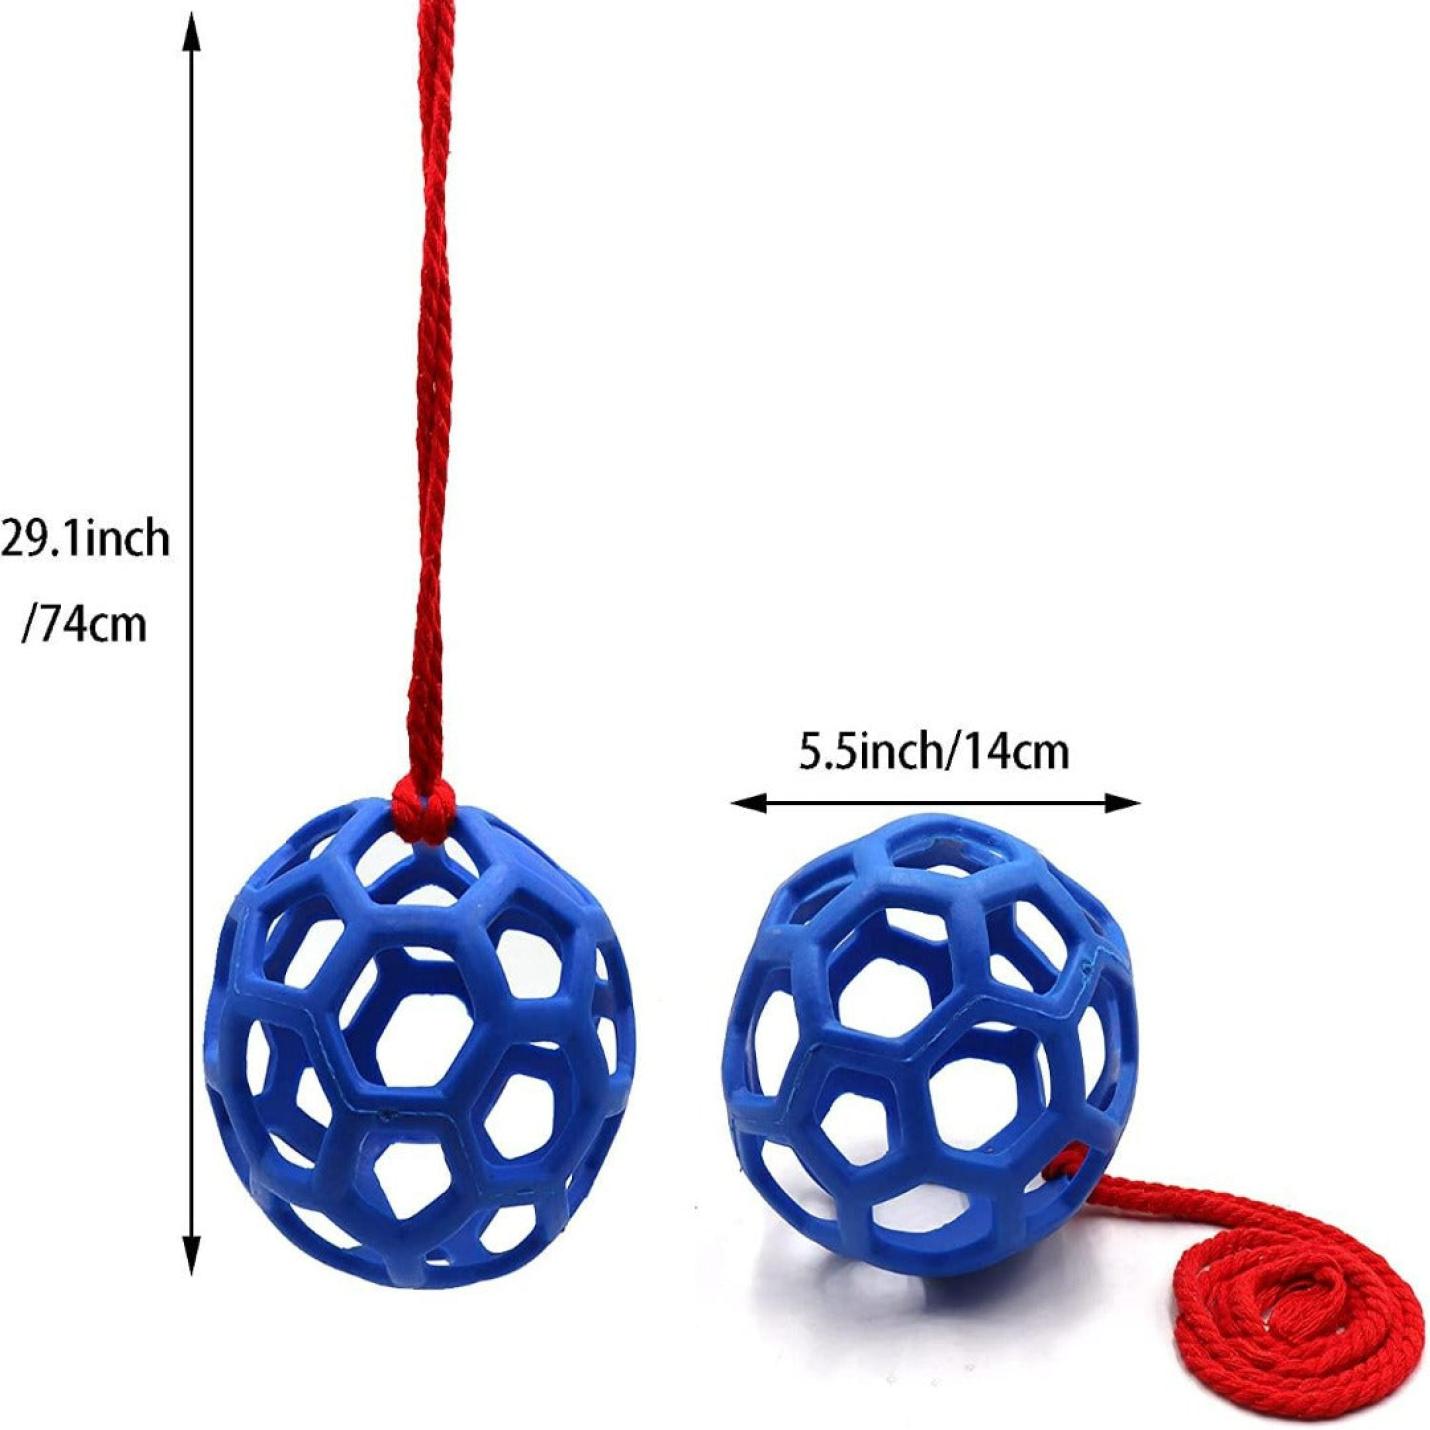 2 horse treat balls for hanging and stress relief, with hay feeder and toy ball